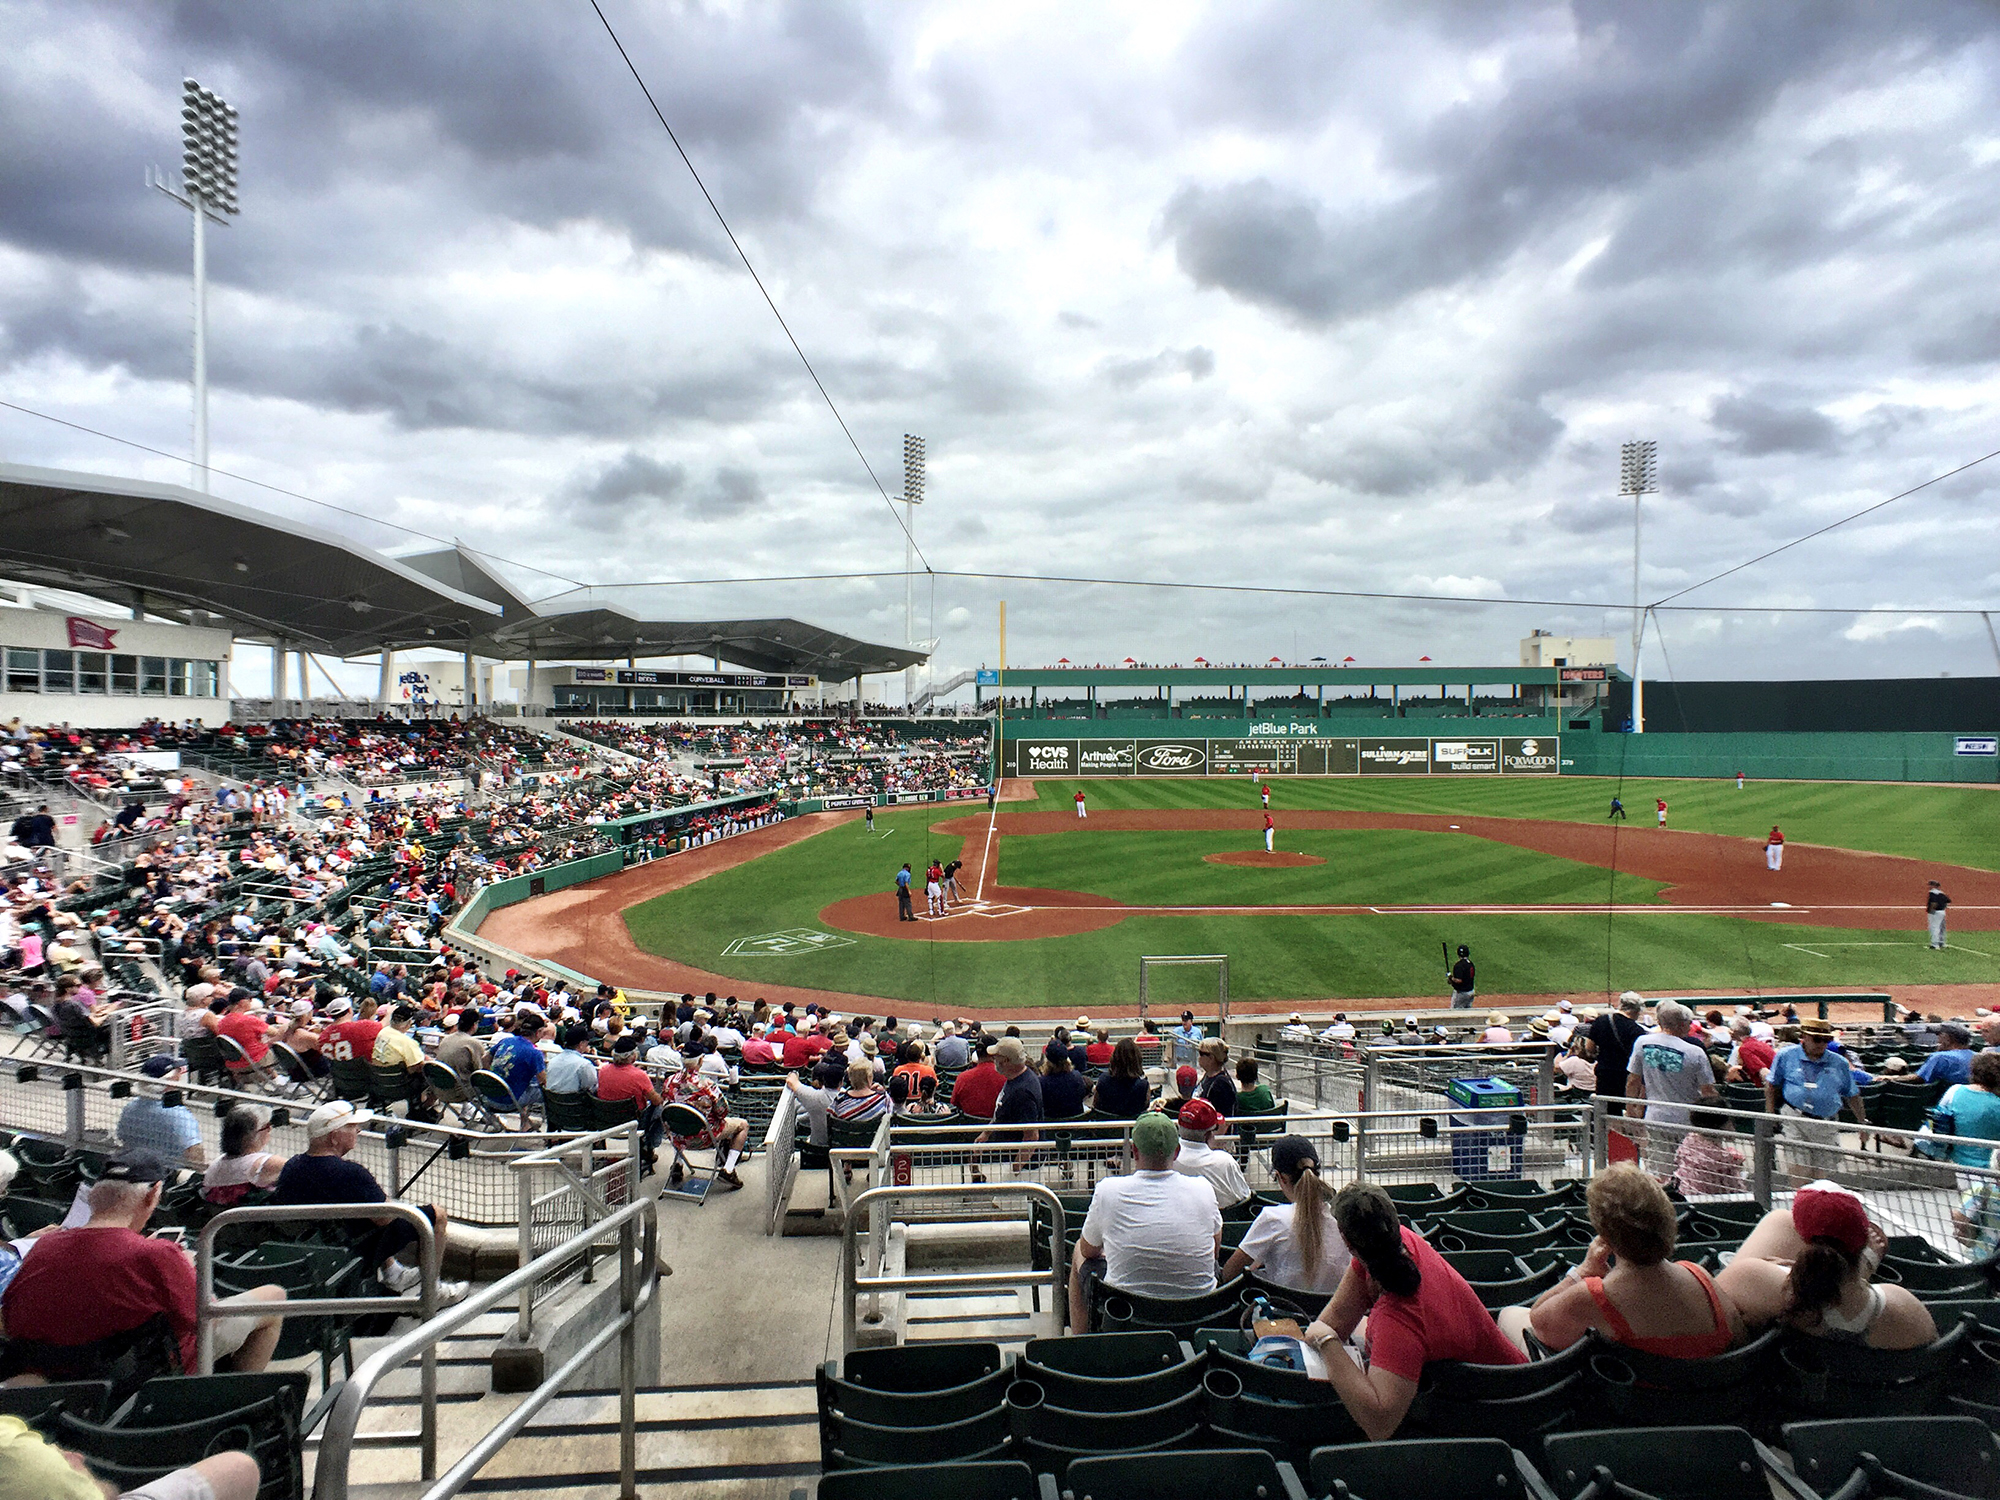 Getting to JetBlue Park